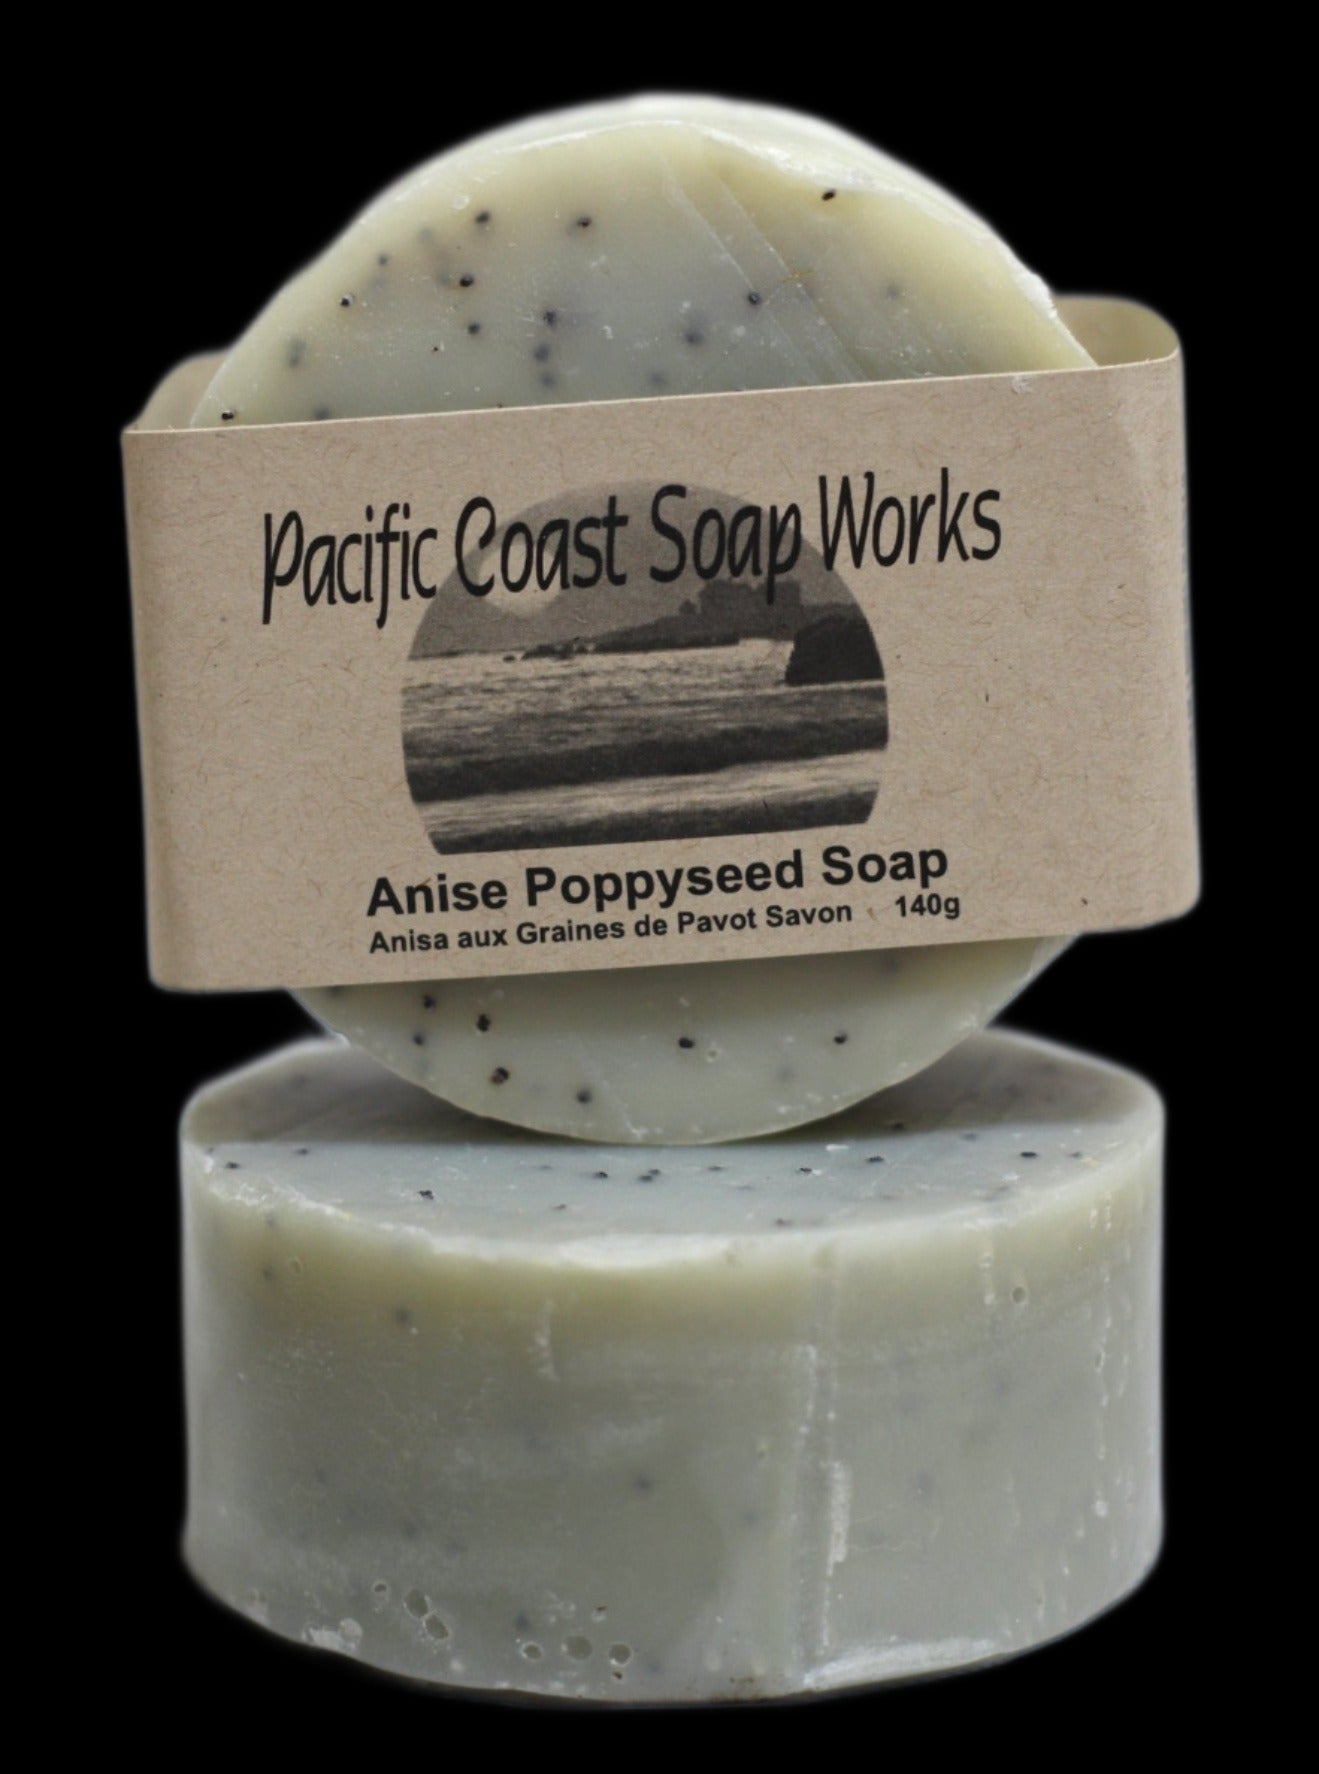 anise poppyseed soap bar. licorice soap. charcoal soap. handmade soap vancouver